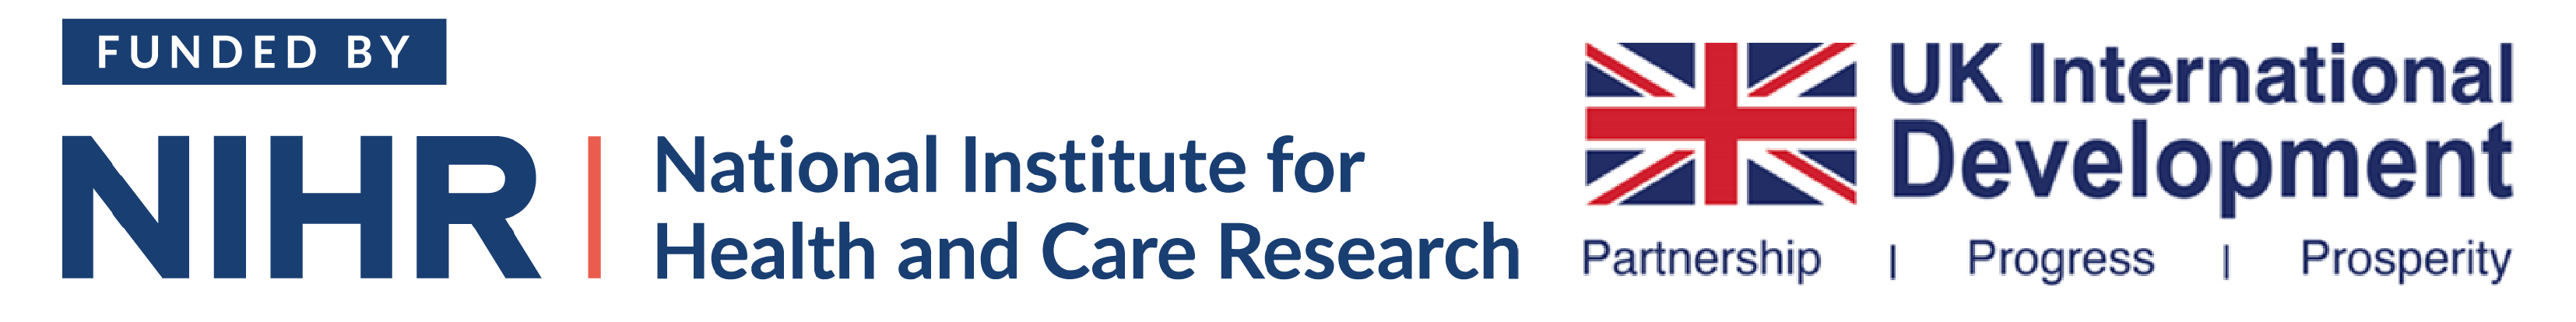 National Institute for Health and Care Research